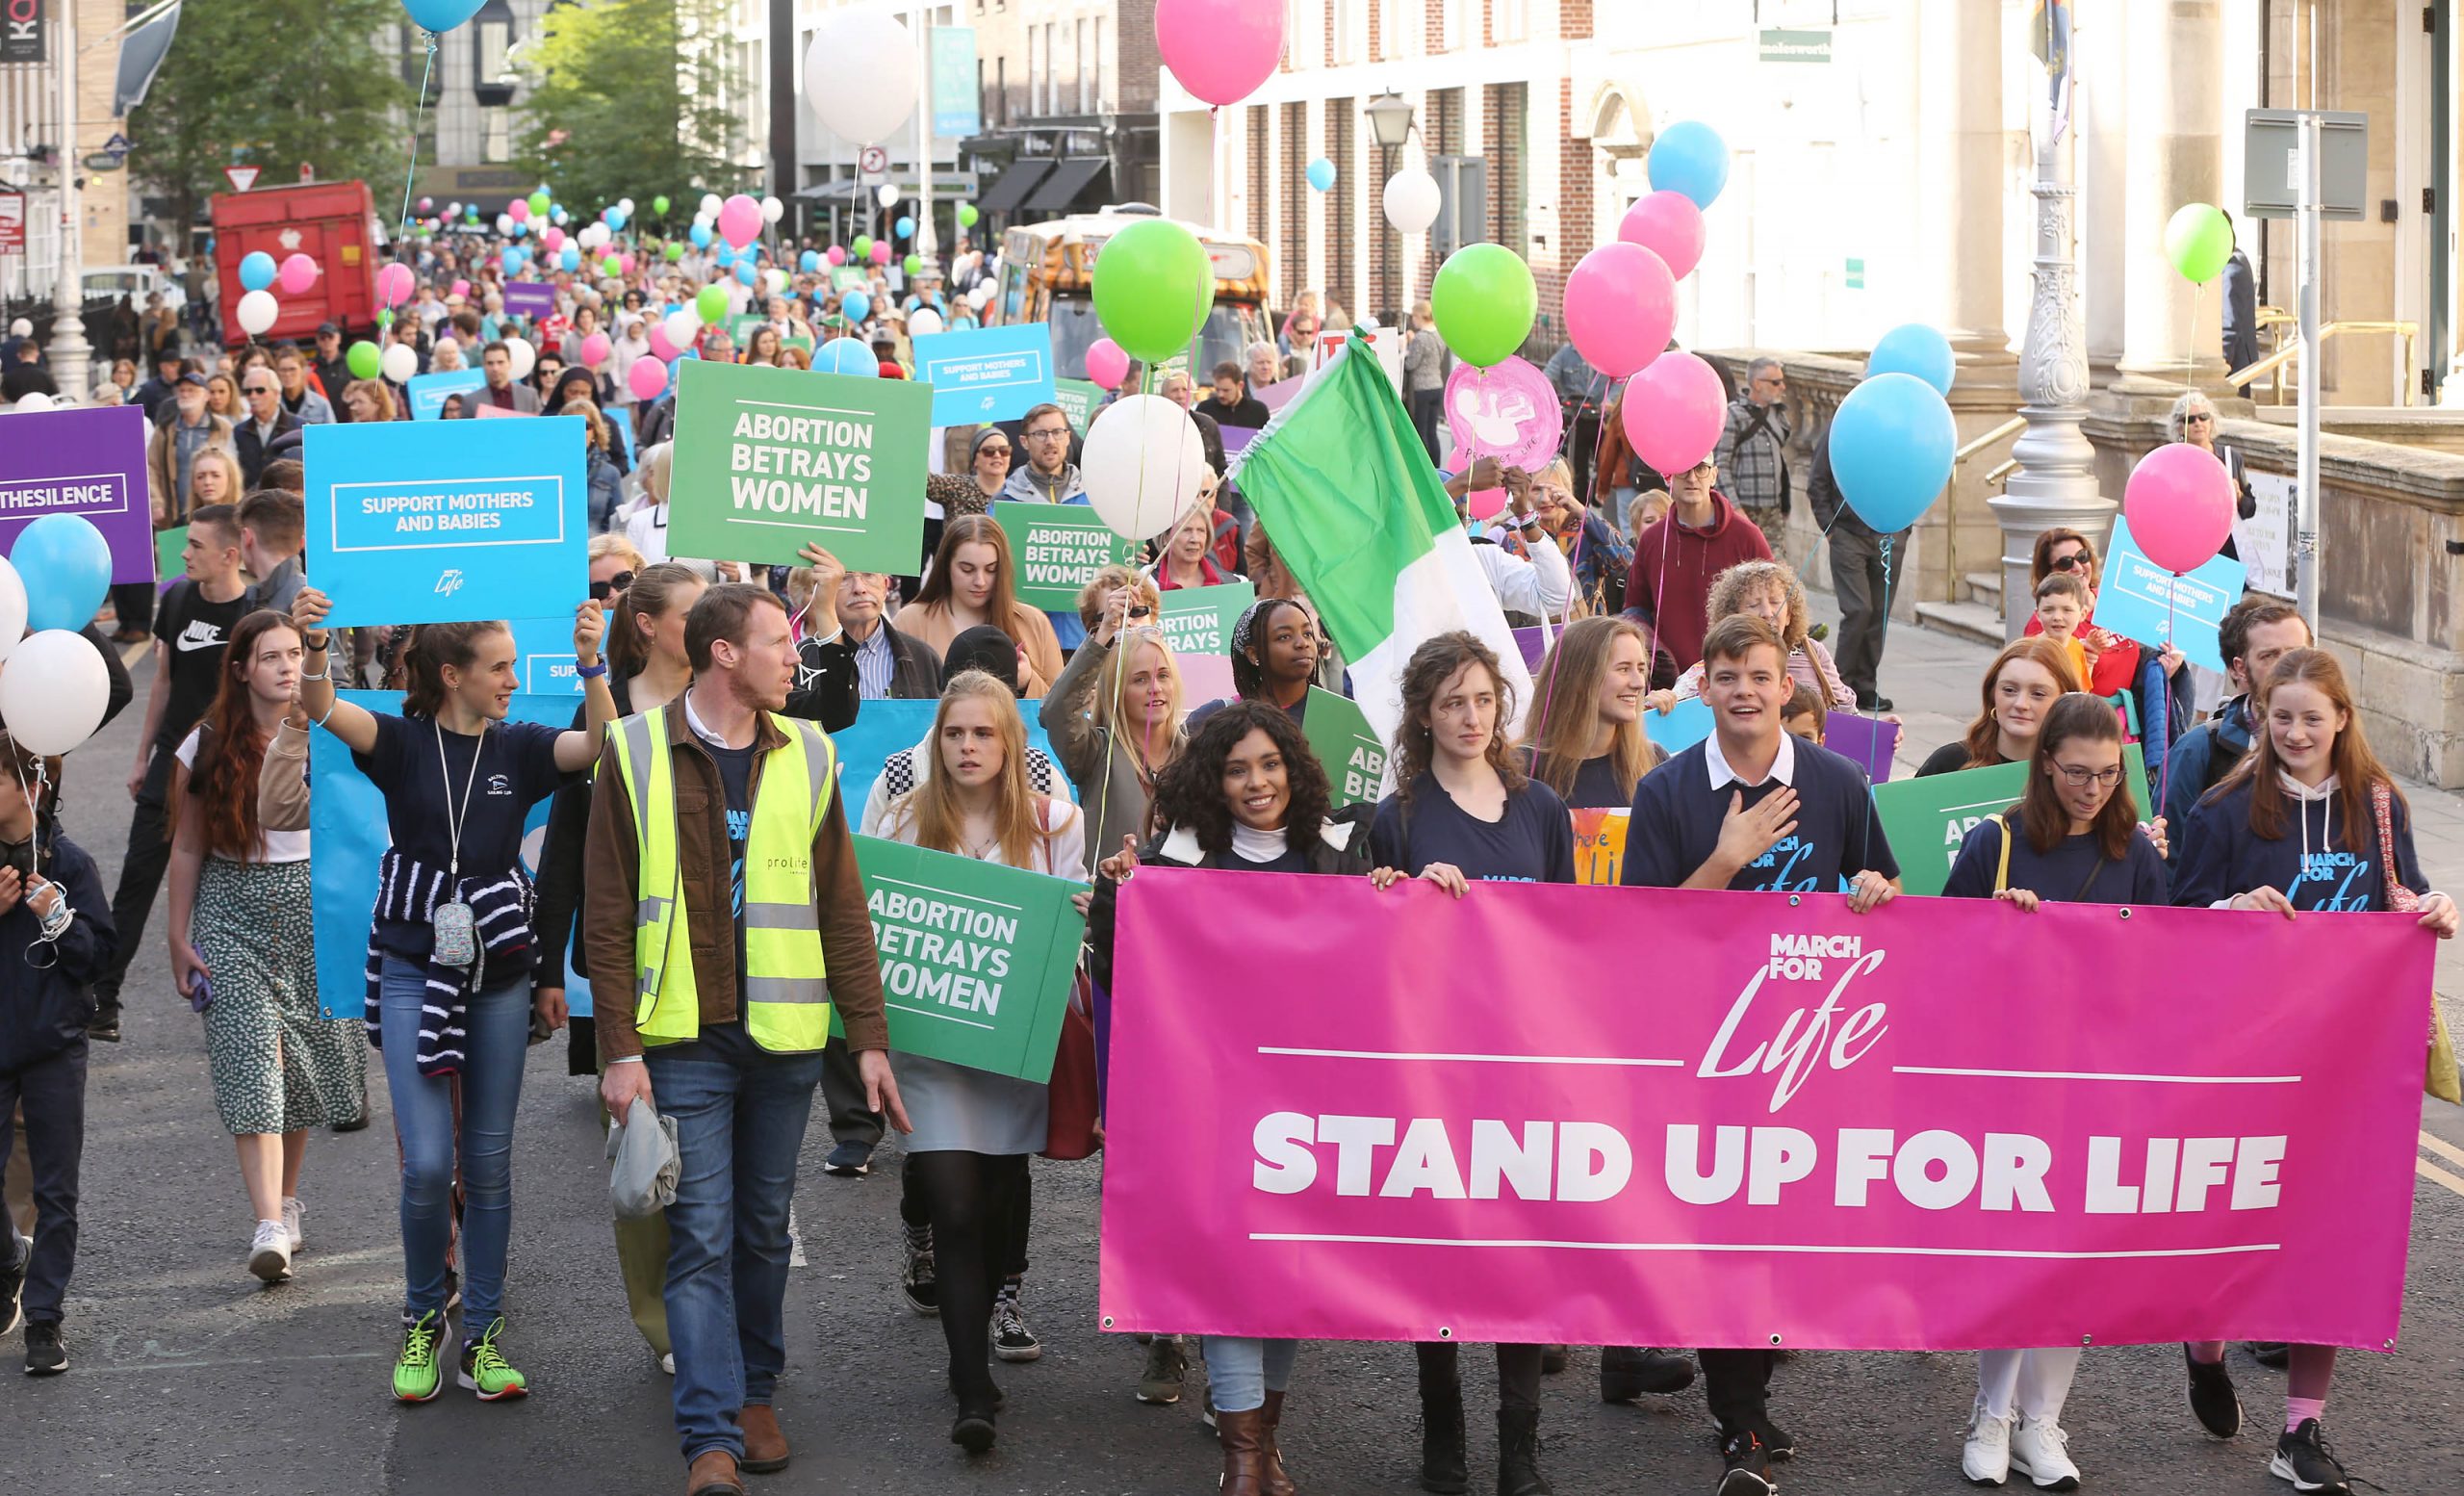 23.09.2022 – Thousands attend March for Life in Dublin